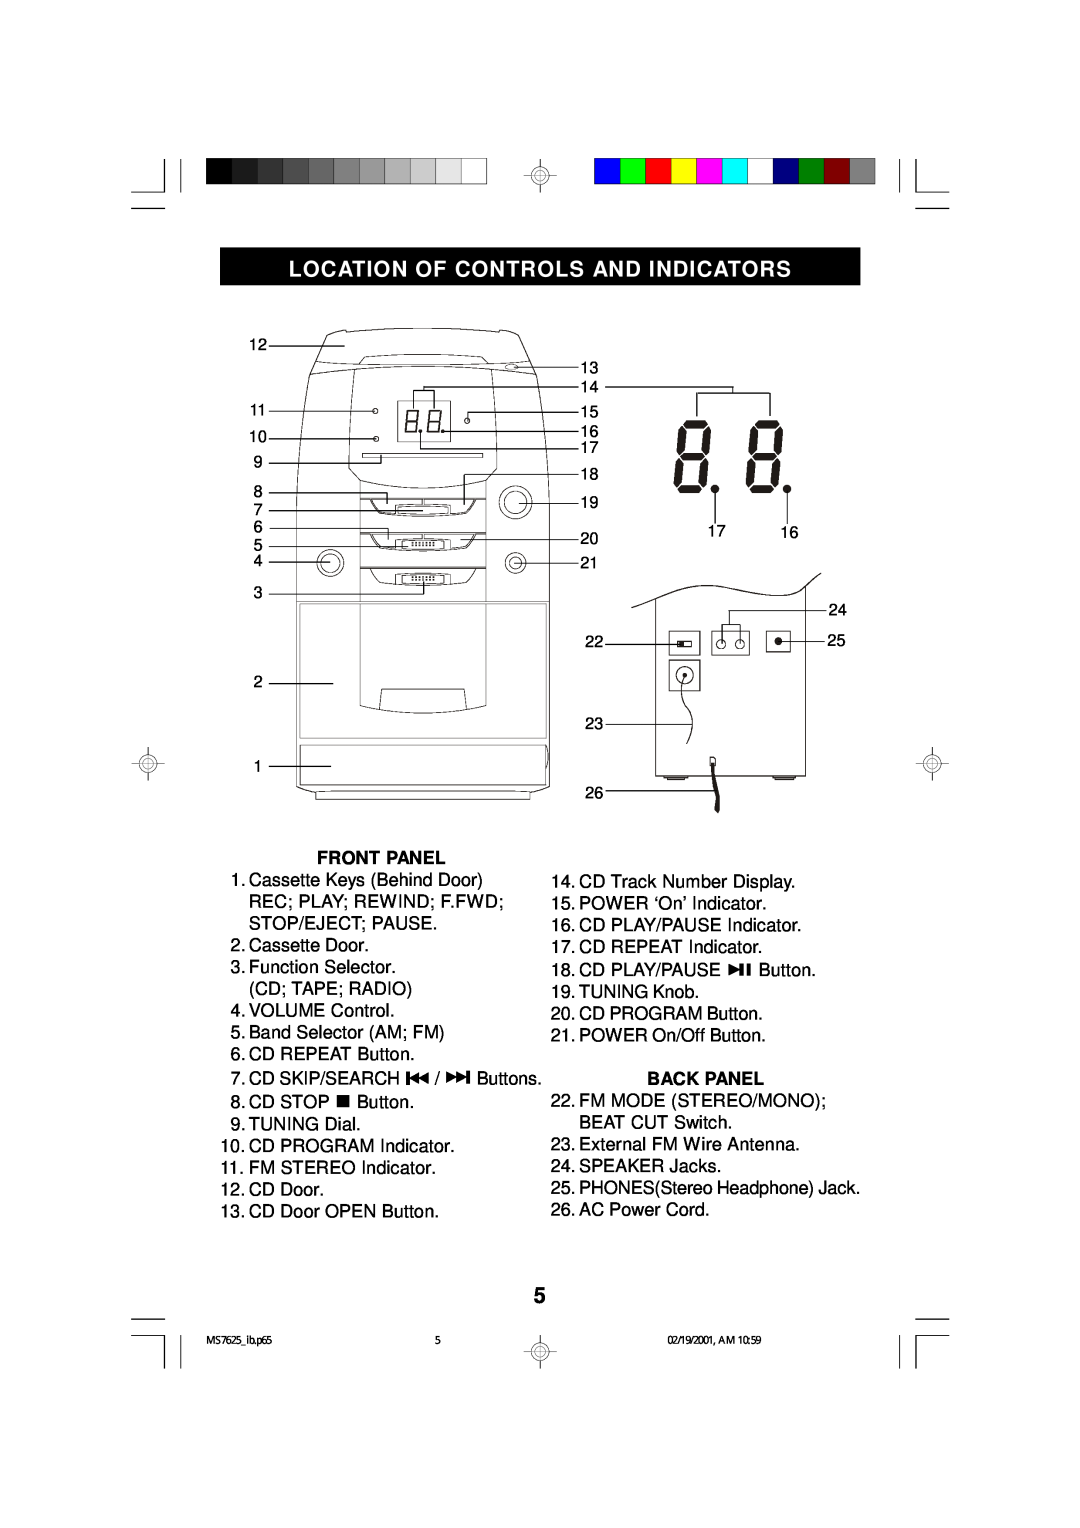 Emerson MS7625 owner manual Location Of Controls And Indicators, Front Panel, Back Panel 